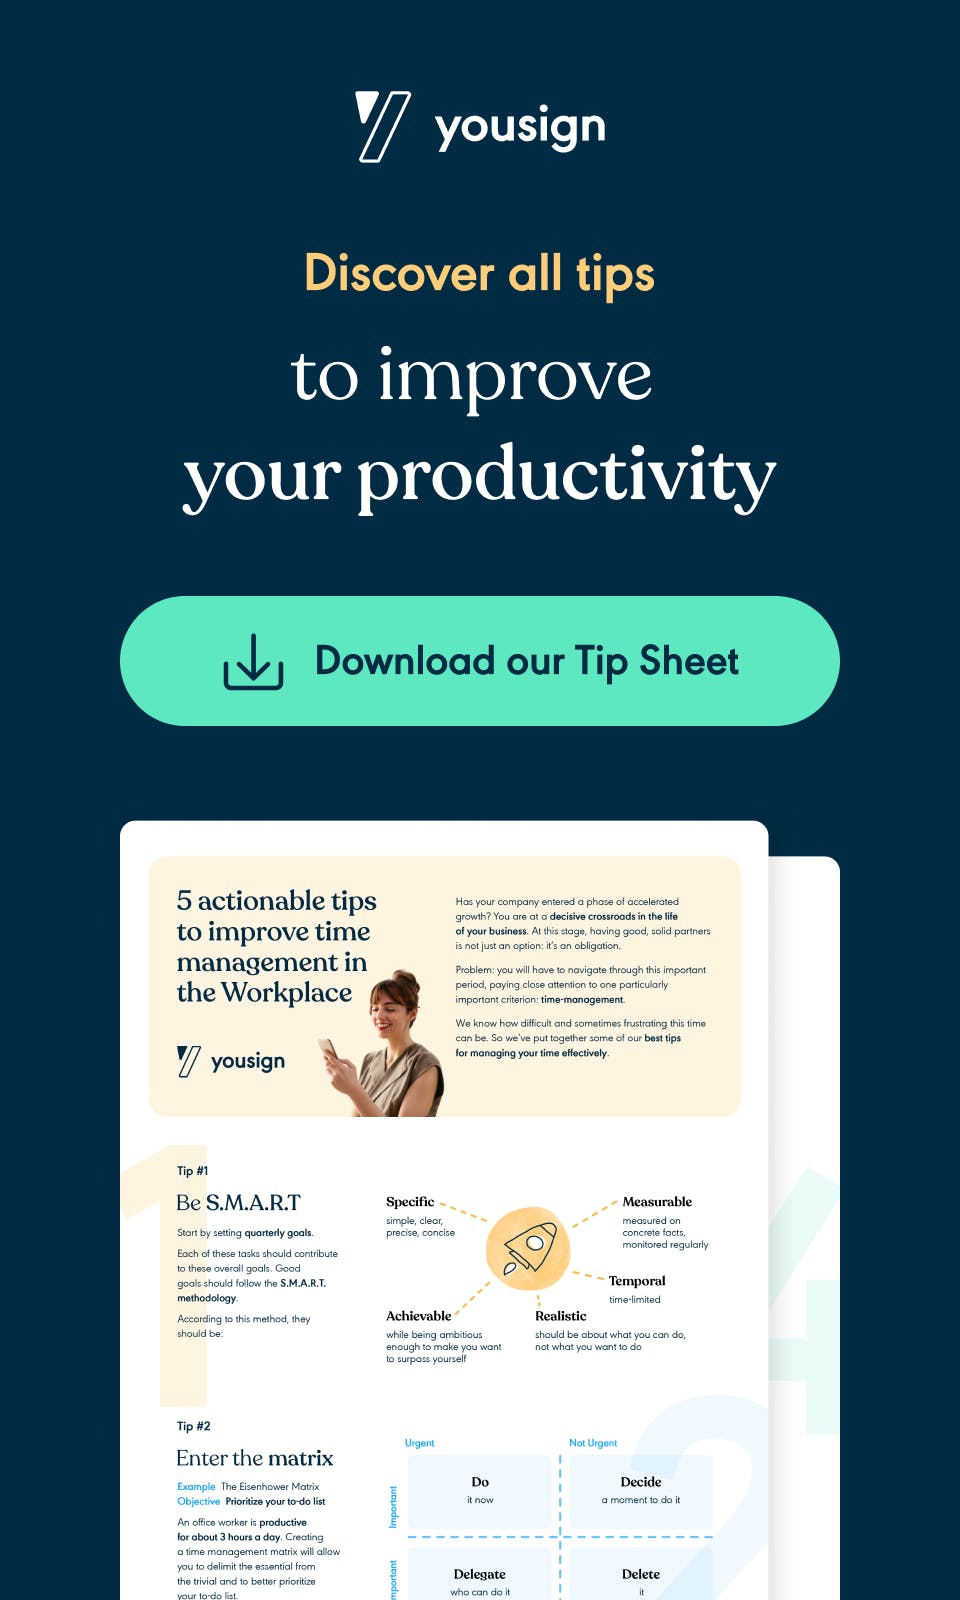 Discover all tips to improve your productivity